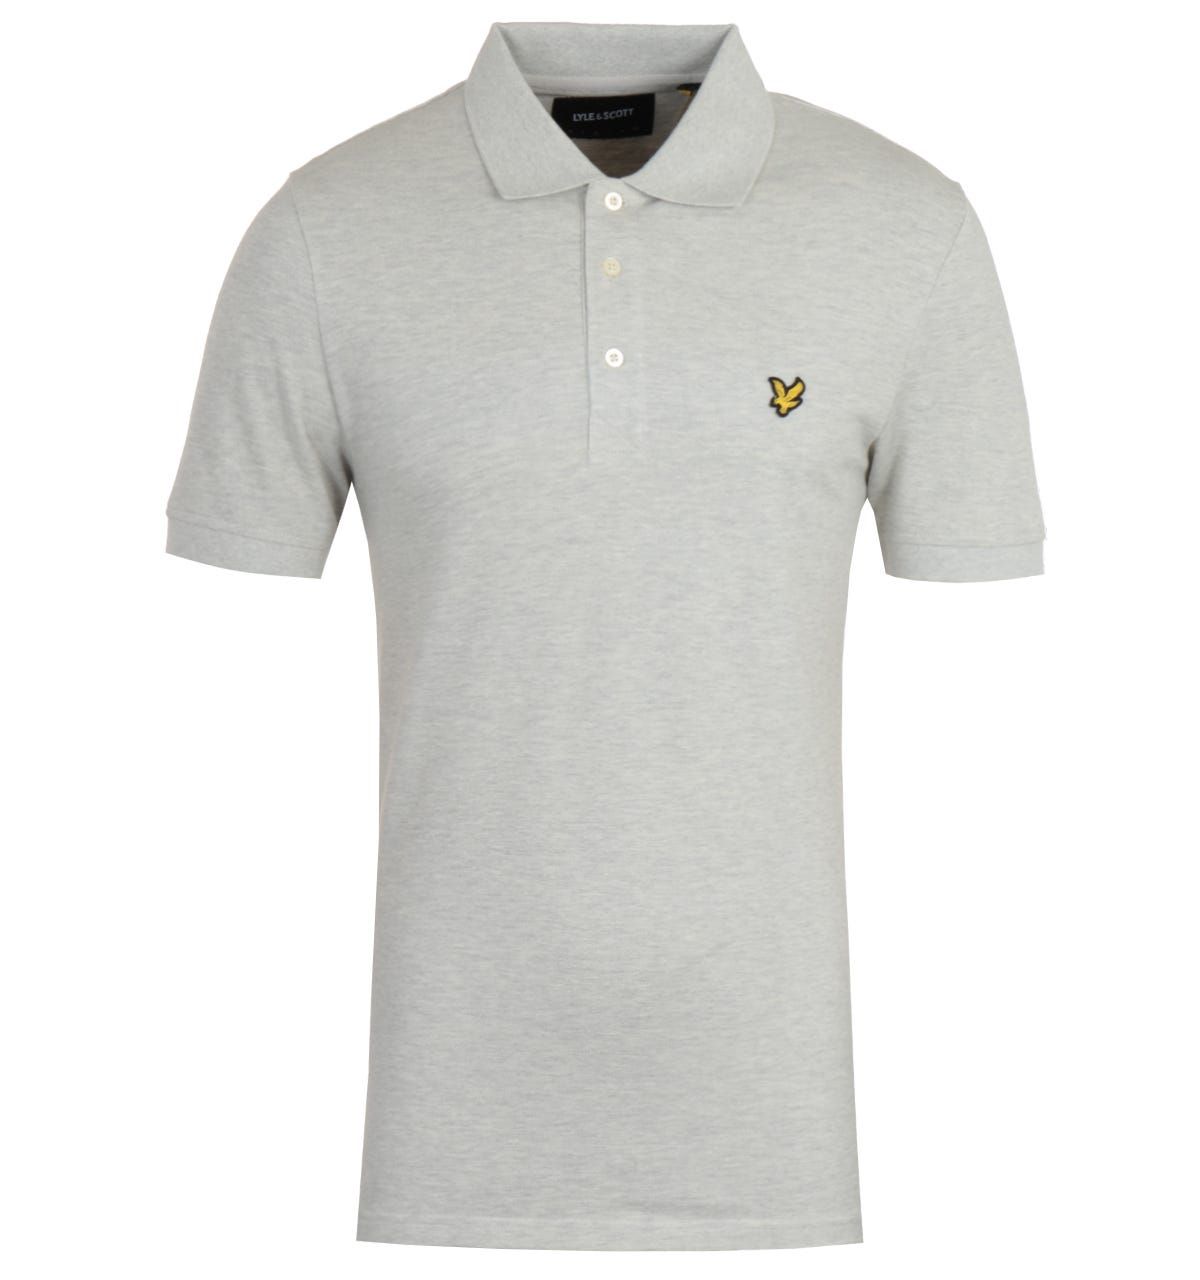 Style, quality and quintessentially British, Lyle & Scott have over 100 years worth of technical expertise going into their products. Traditional garments have been given an injection of contemporary aesthetics but don\'t forget that iconic Golden Eagle logo, you\'re immediately recognised to be wearing a reputable brand. Which is certainly the case with this Polo Shirt.Regular FitPure Pique Cotton Construction Three Button PlacketKnitted CollarRibbed CuffsShort SleevesSide Hem VentsLyle & Scott BrandingStyle & FitRegular FitFits True to SizeComposition & Care100% CottonMachine Wash